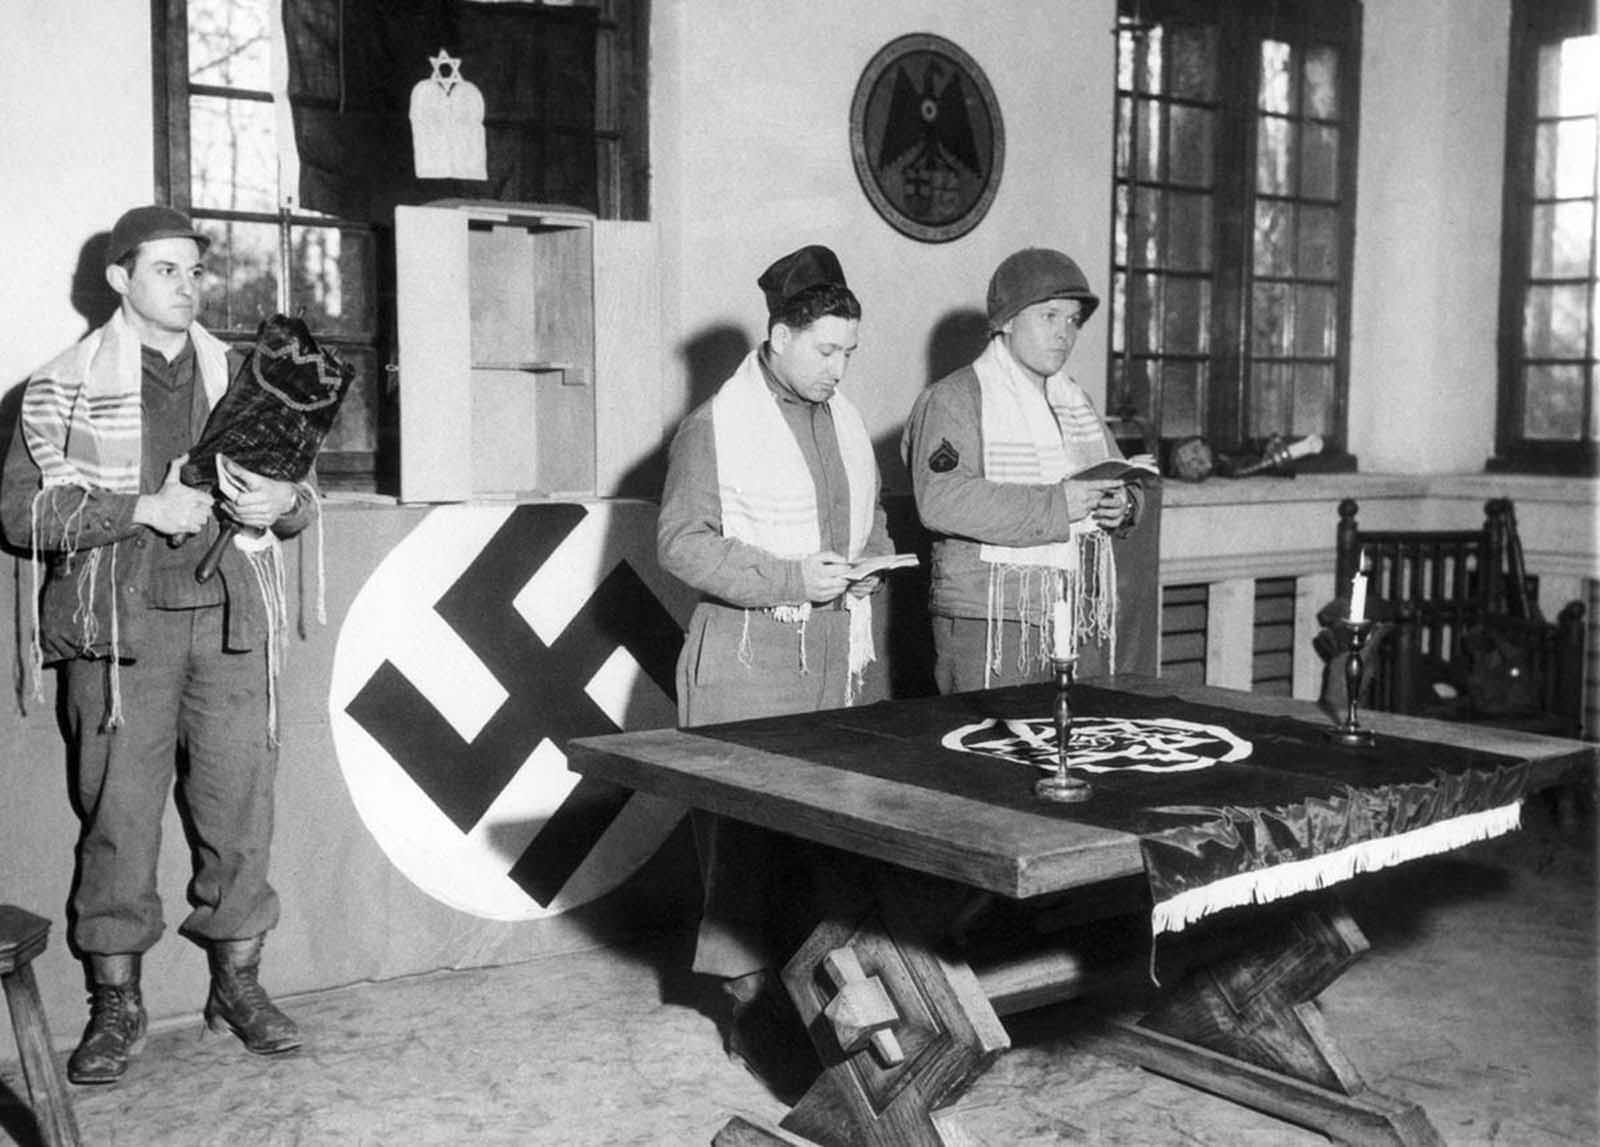 Pfc. Abraham Mirmelstein of Newport News, Virginia, holds the Holy Scroll as Capt. Manuel M. Poliakoff, and Cpl. Martin Willen, of Baltimore, Maryland, conduct services in Schloss Rheydt, former residence of Dr. Joseph Paul Goebbels, Nazi propaganda minister, in Münchengladbach, Germany on March 18, 1945. They were the first Jewish services held east of the Rur River and were offered in memory of soldiers of the faith who were lost by the 29th Division, U.S. 9th Army.